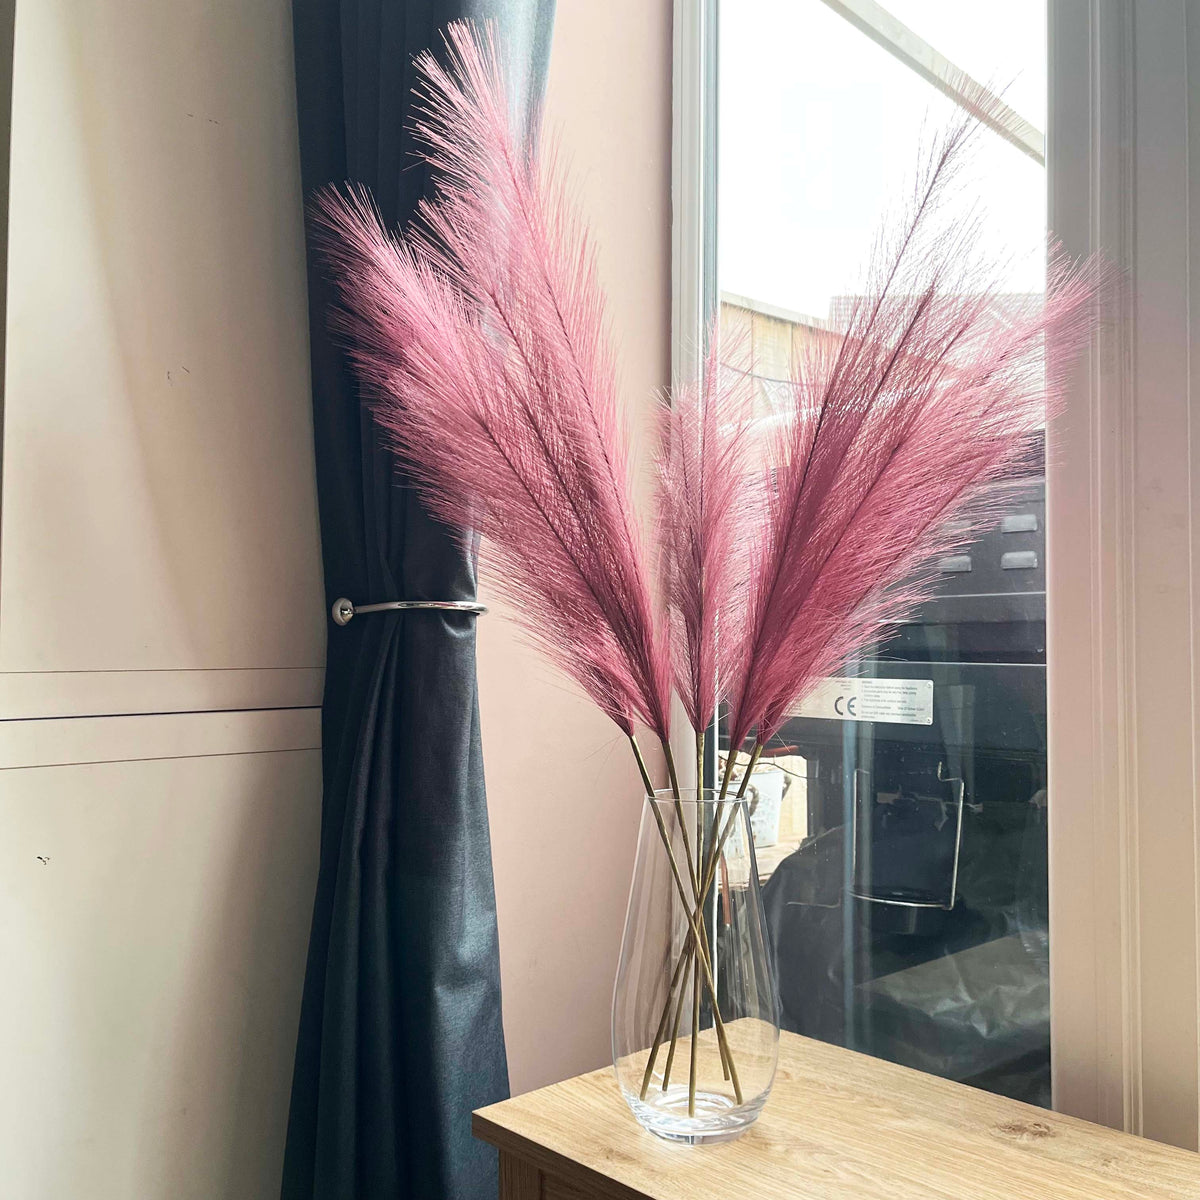 Scarlet Red Faux Pampas Grass Stem in a glass vase on a table next to window.